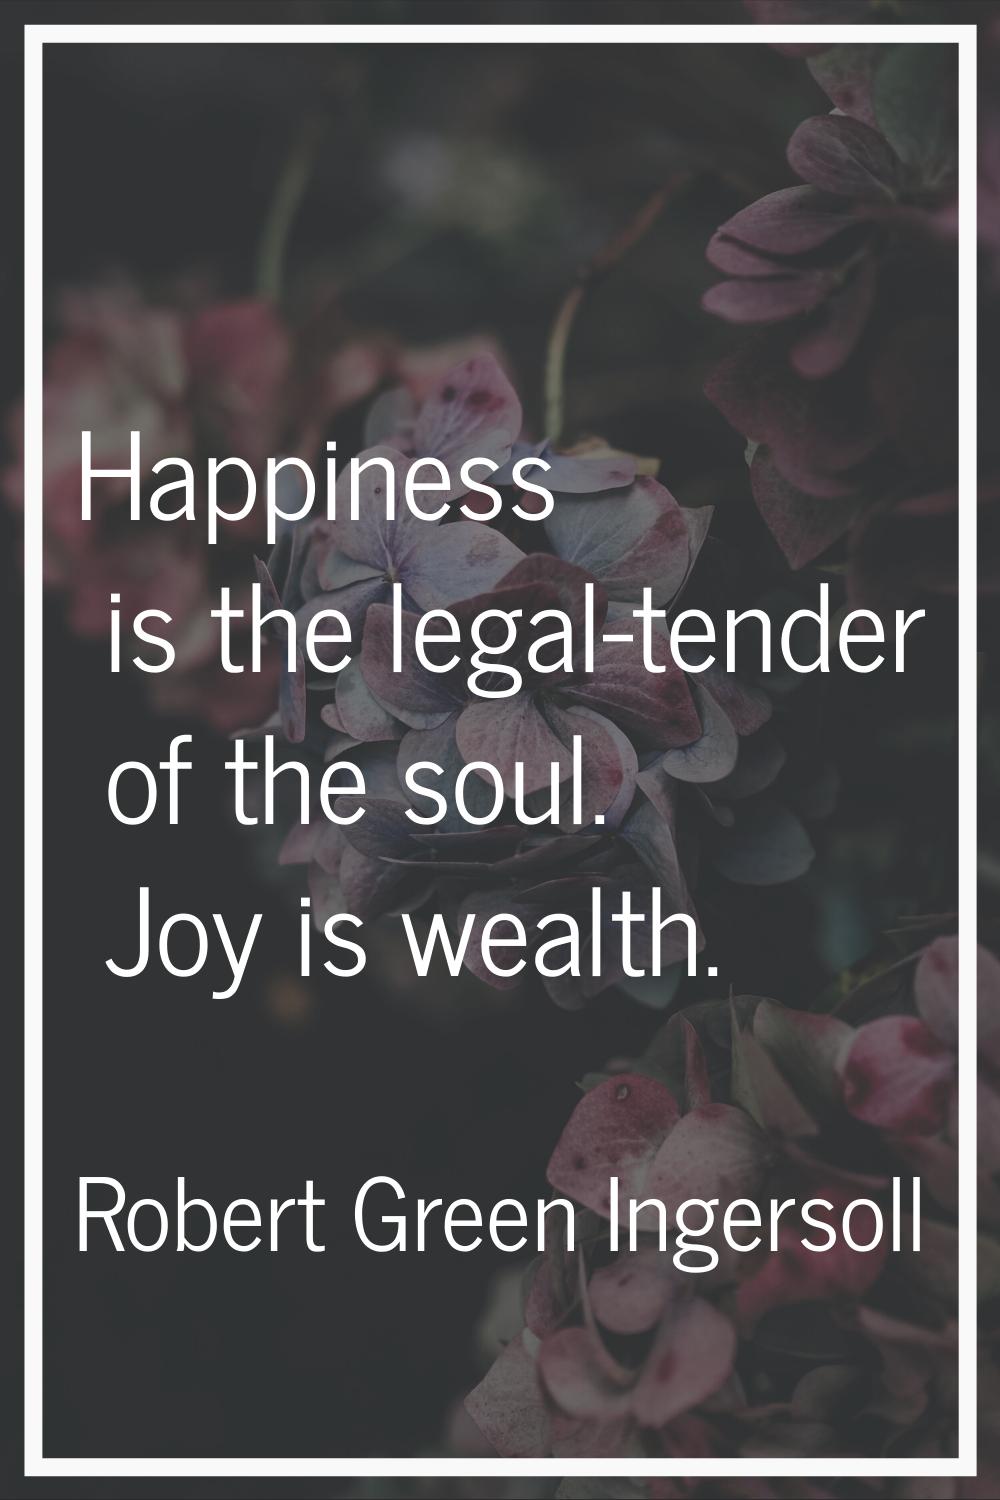 Happiness is the legal-tender of the soul. Joy is wealth.